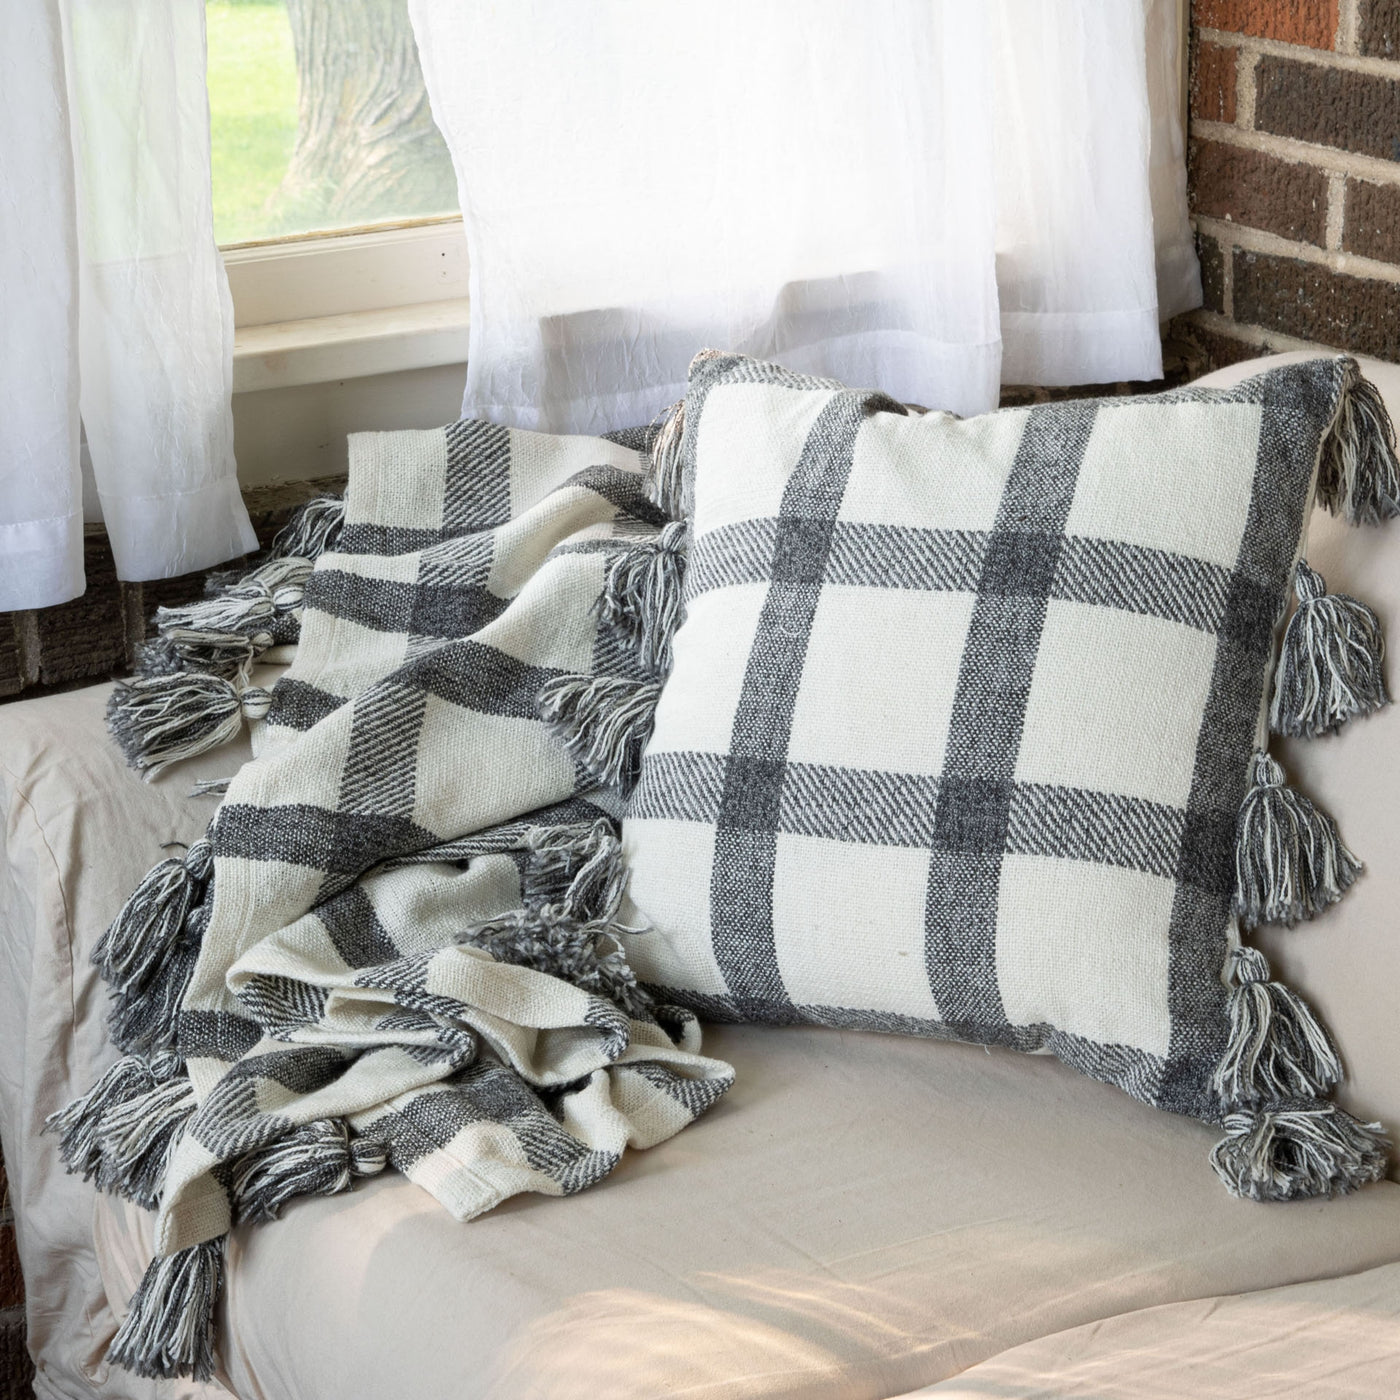 Classic black and white Plaid Pillow